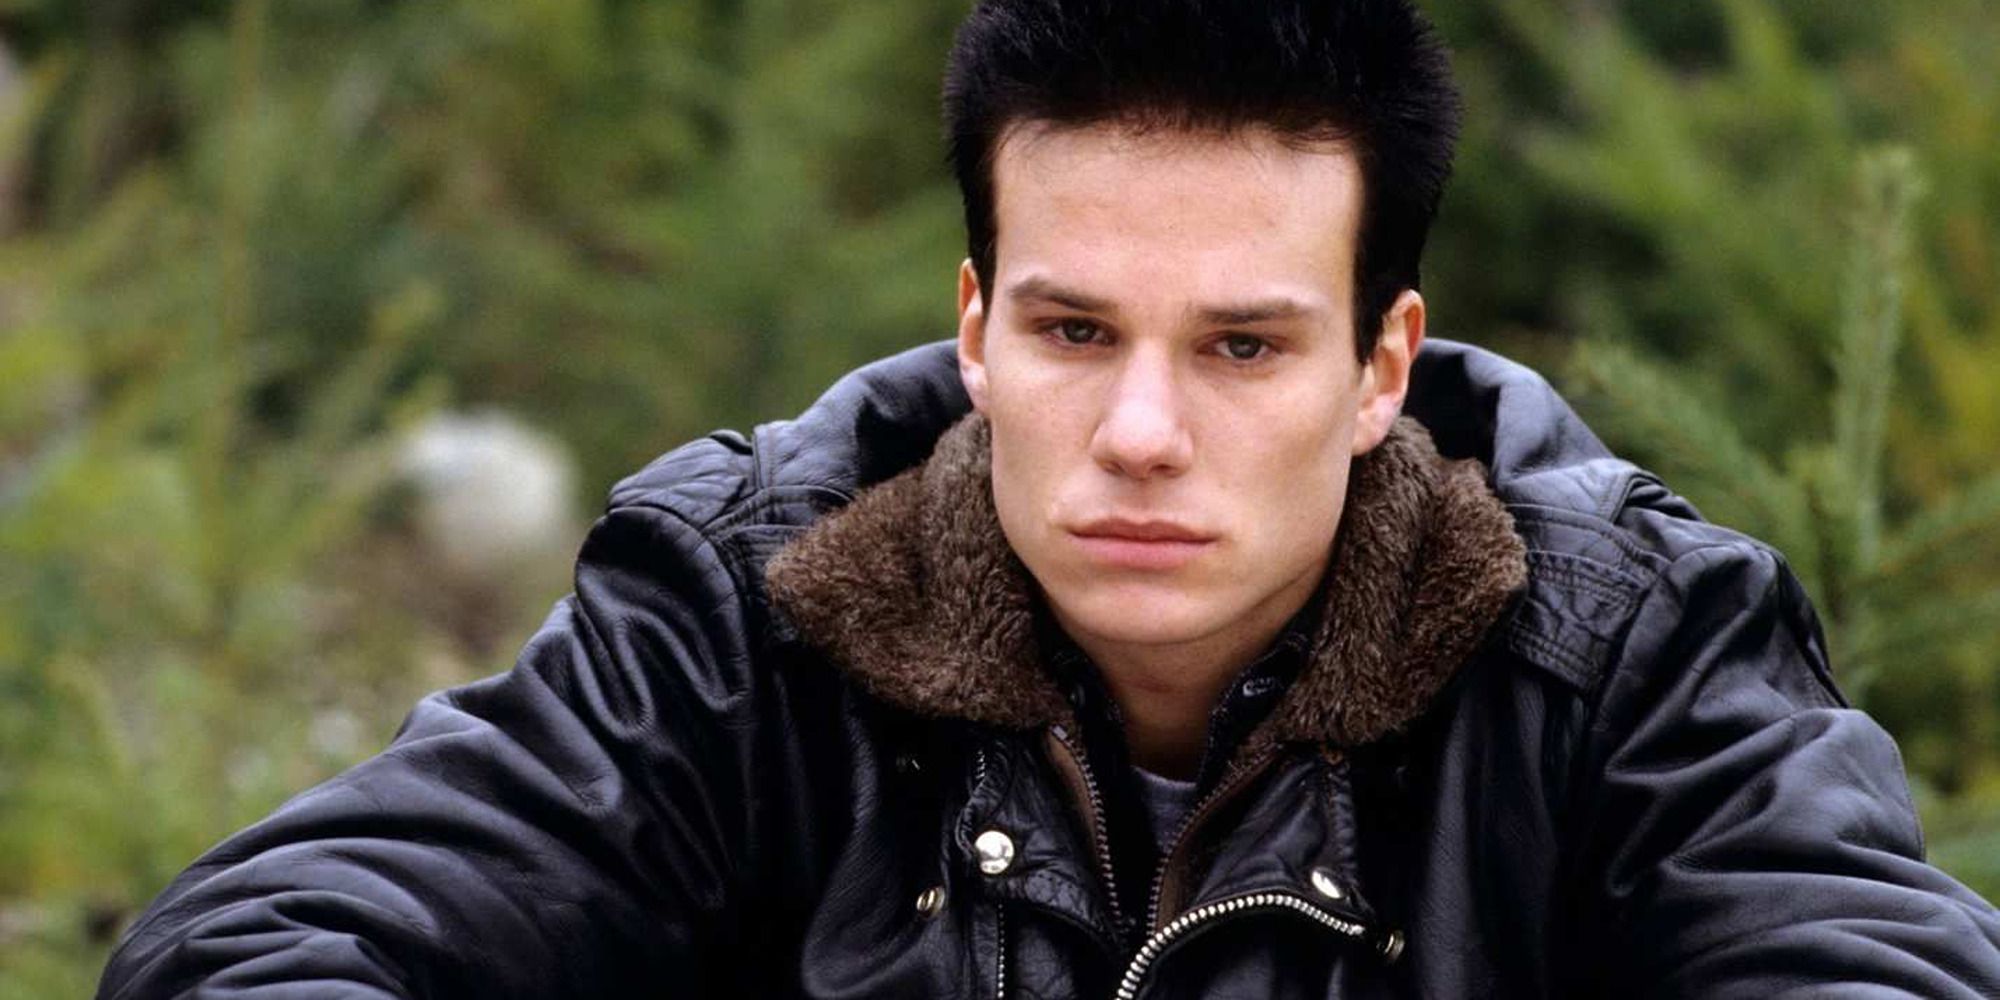 James Marshall as James Hurley in 'Twin Peaks', sitting on the grass, sad